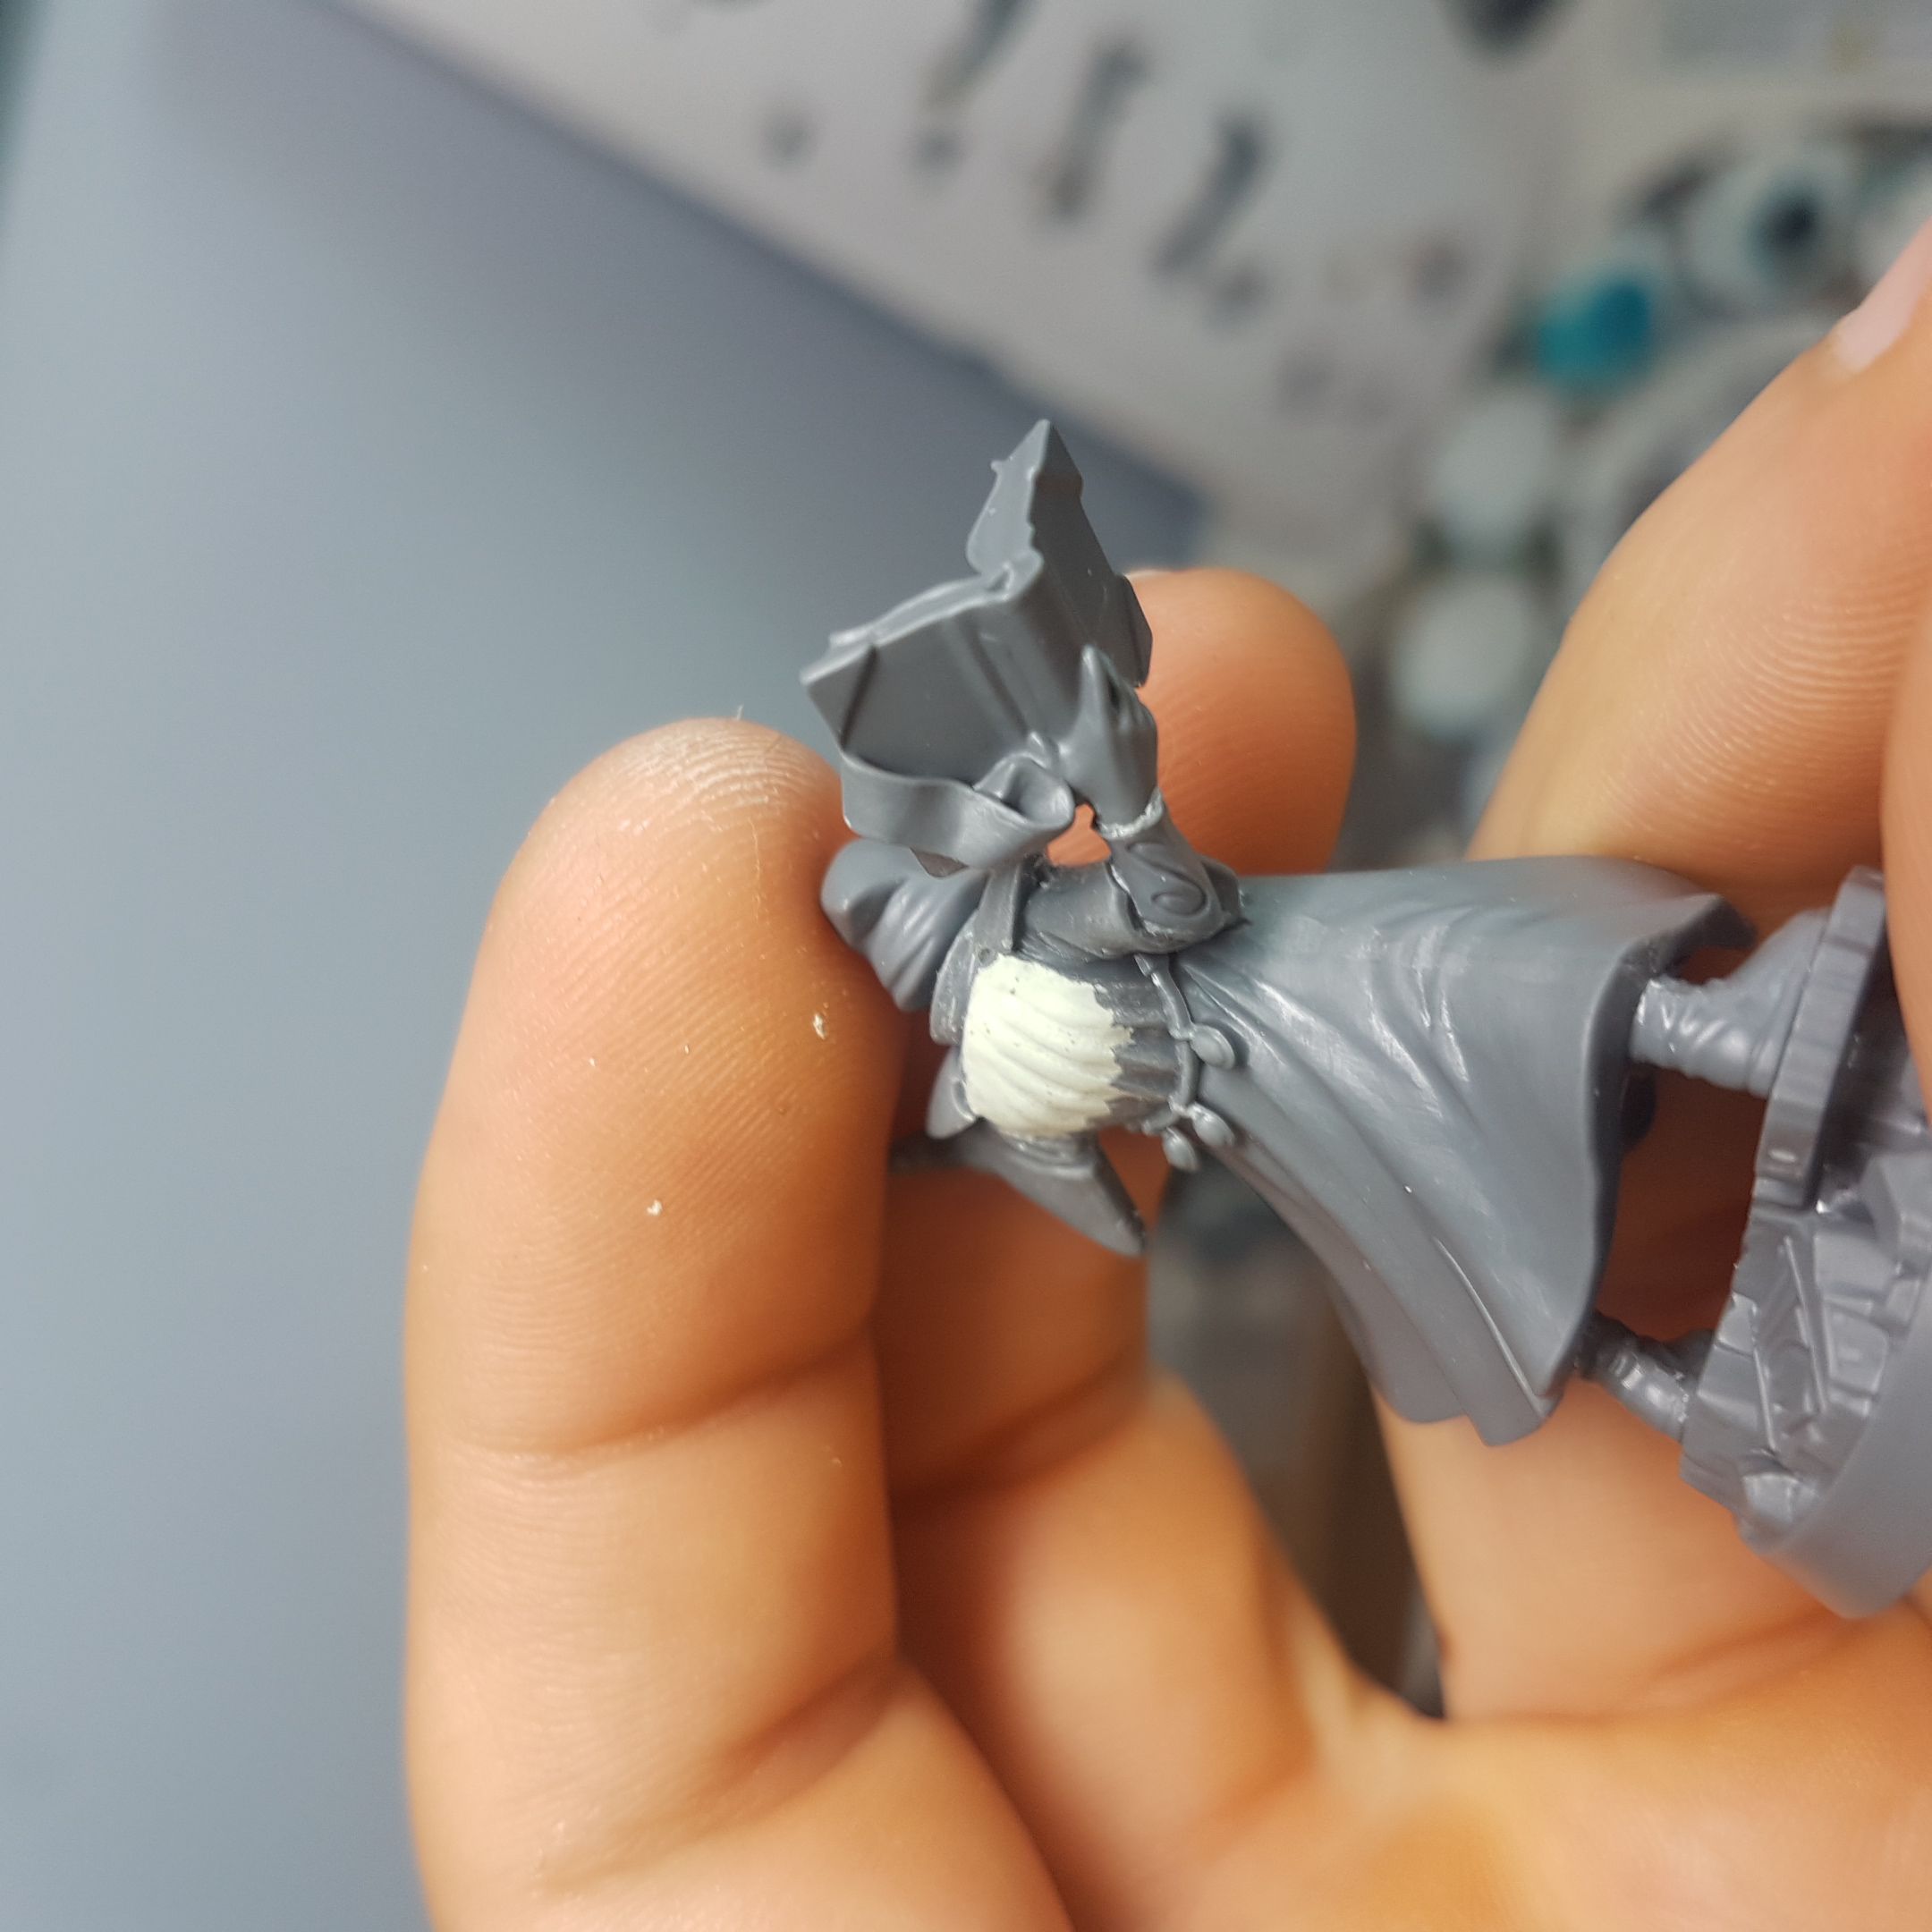 I am not confident with sculpting cloth, I did at least want it to be smooth though, and Milliput (Silver/Grey) sands beautifully.